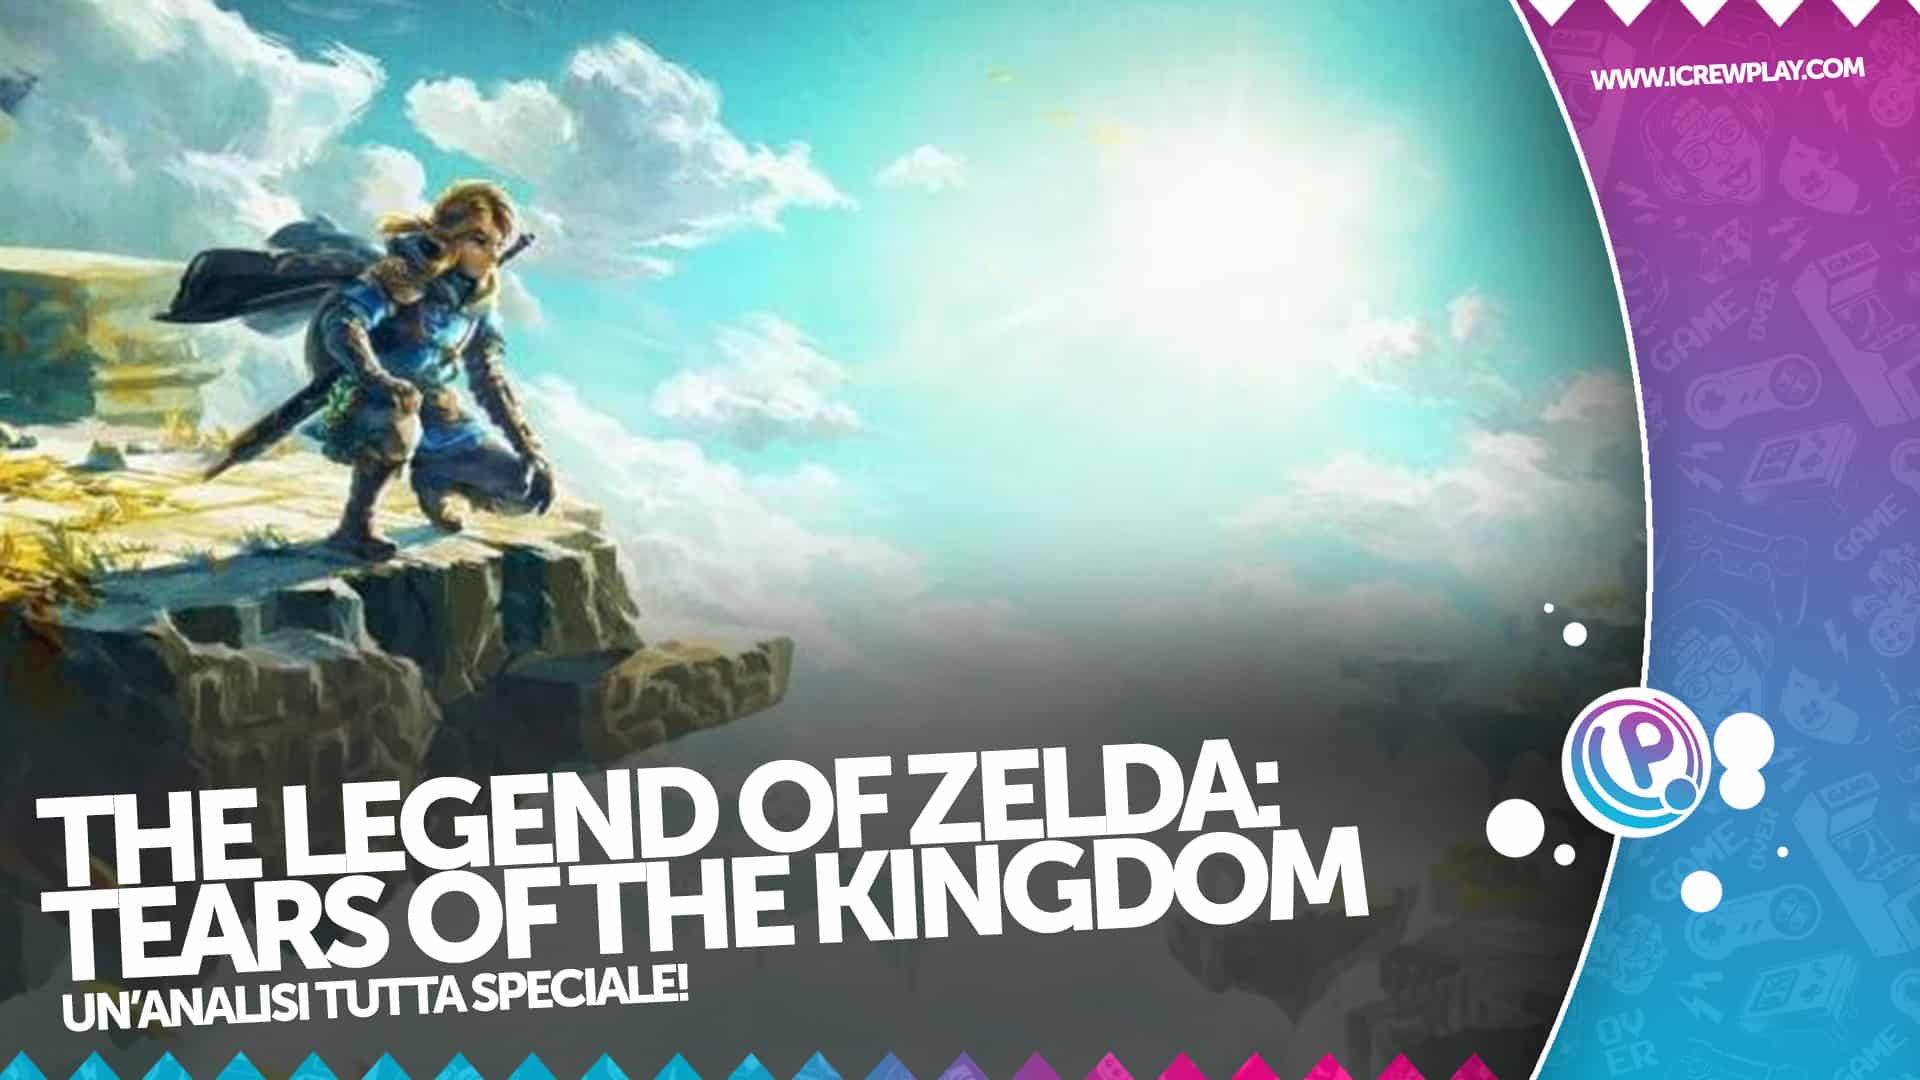 Analisi di The Legend of Zelda Tears of The Kingdom 4